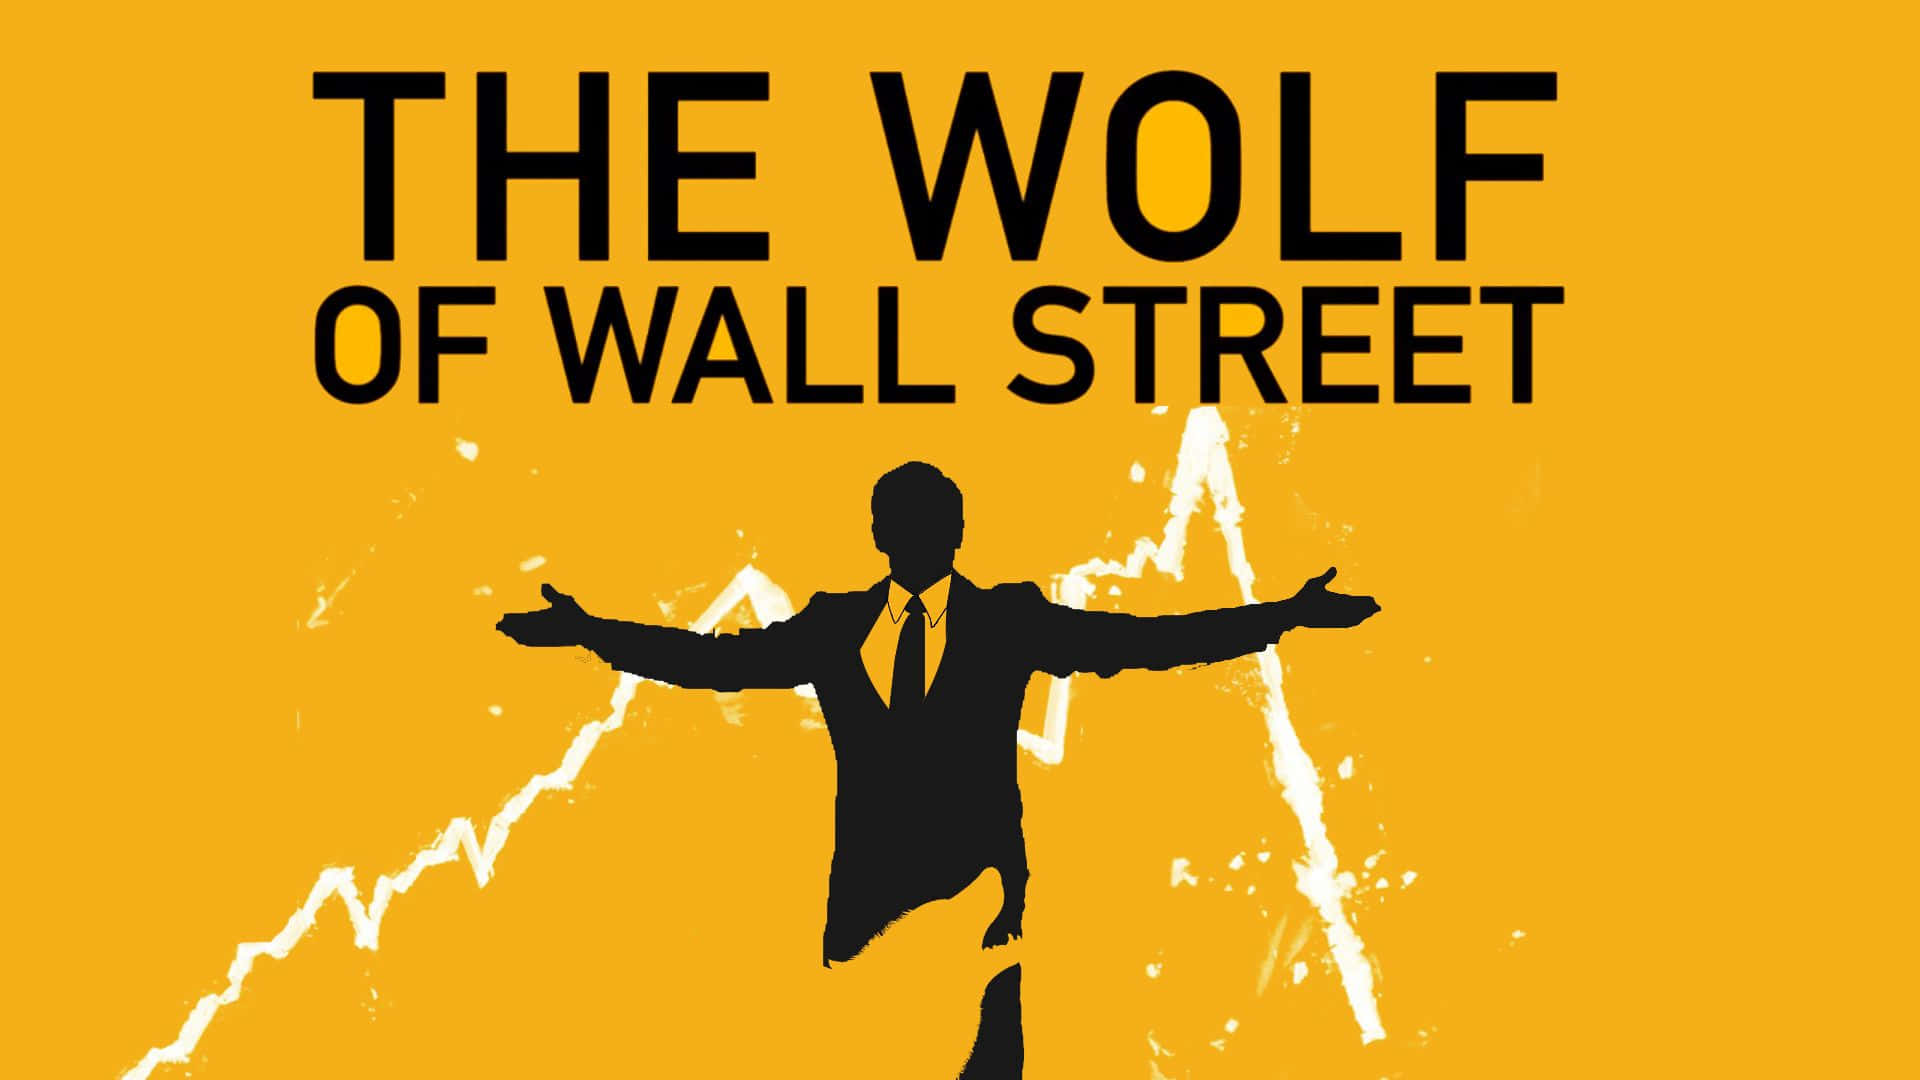 100+] The Wolf Of Wall Street Wallpapers